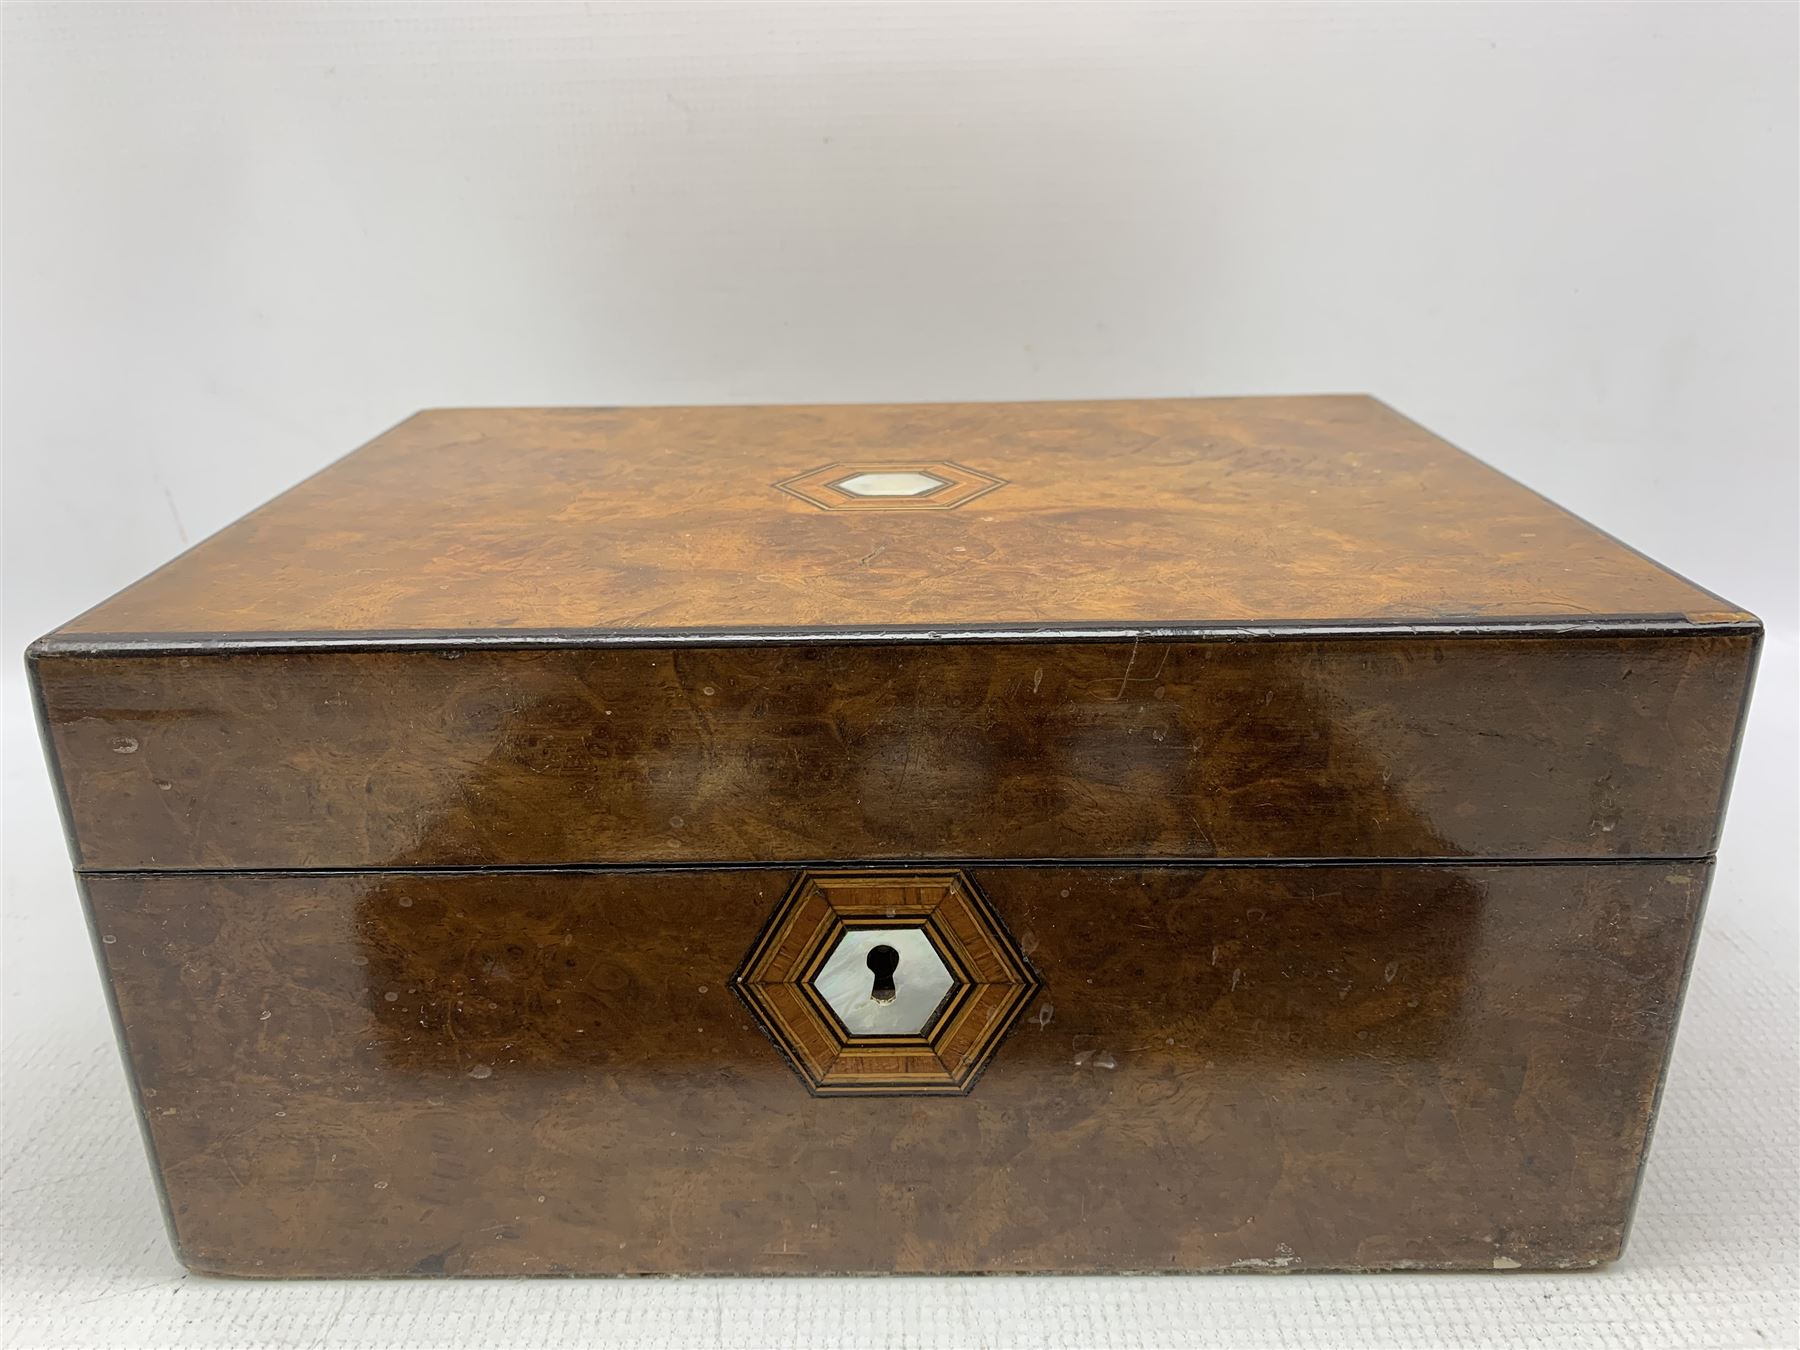 Victorian walnut sewing box with mother of pearl inlay - Image 2 of 4